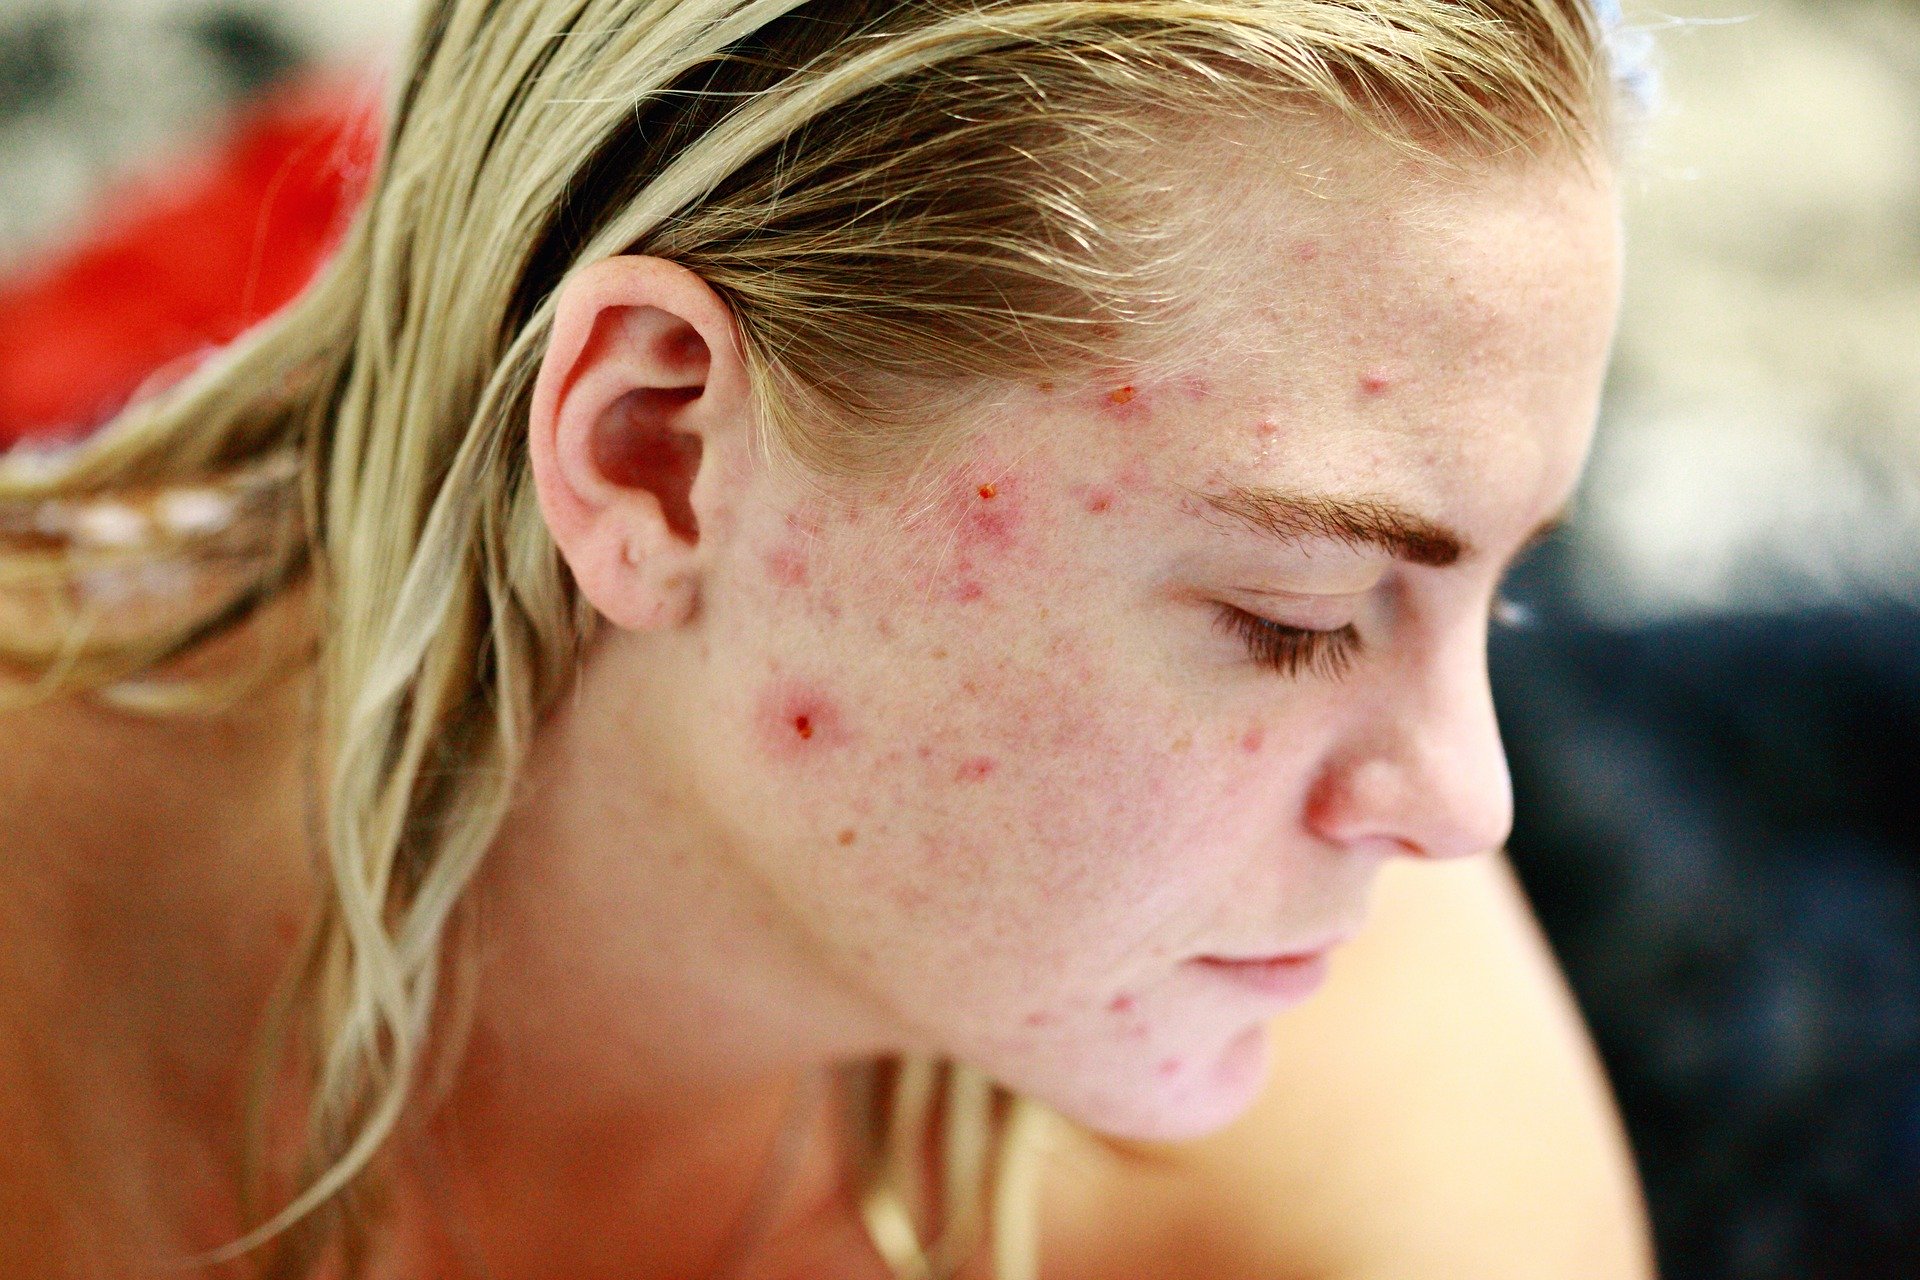 The problem with home remedies for acne